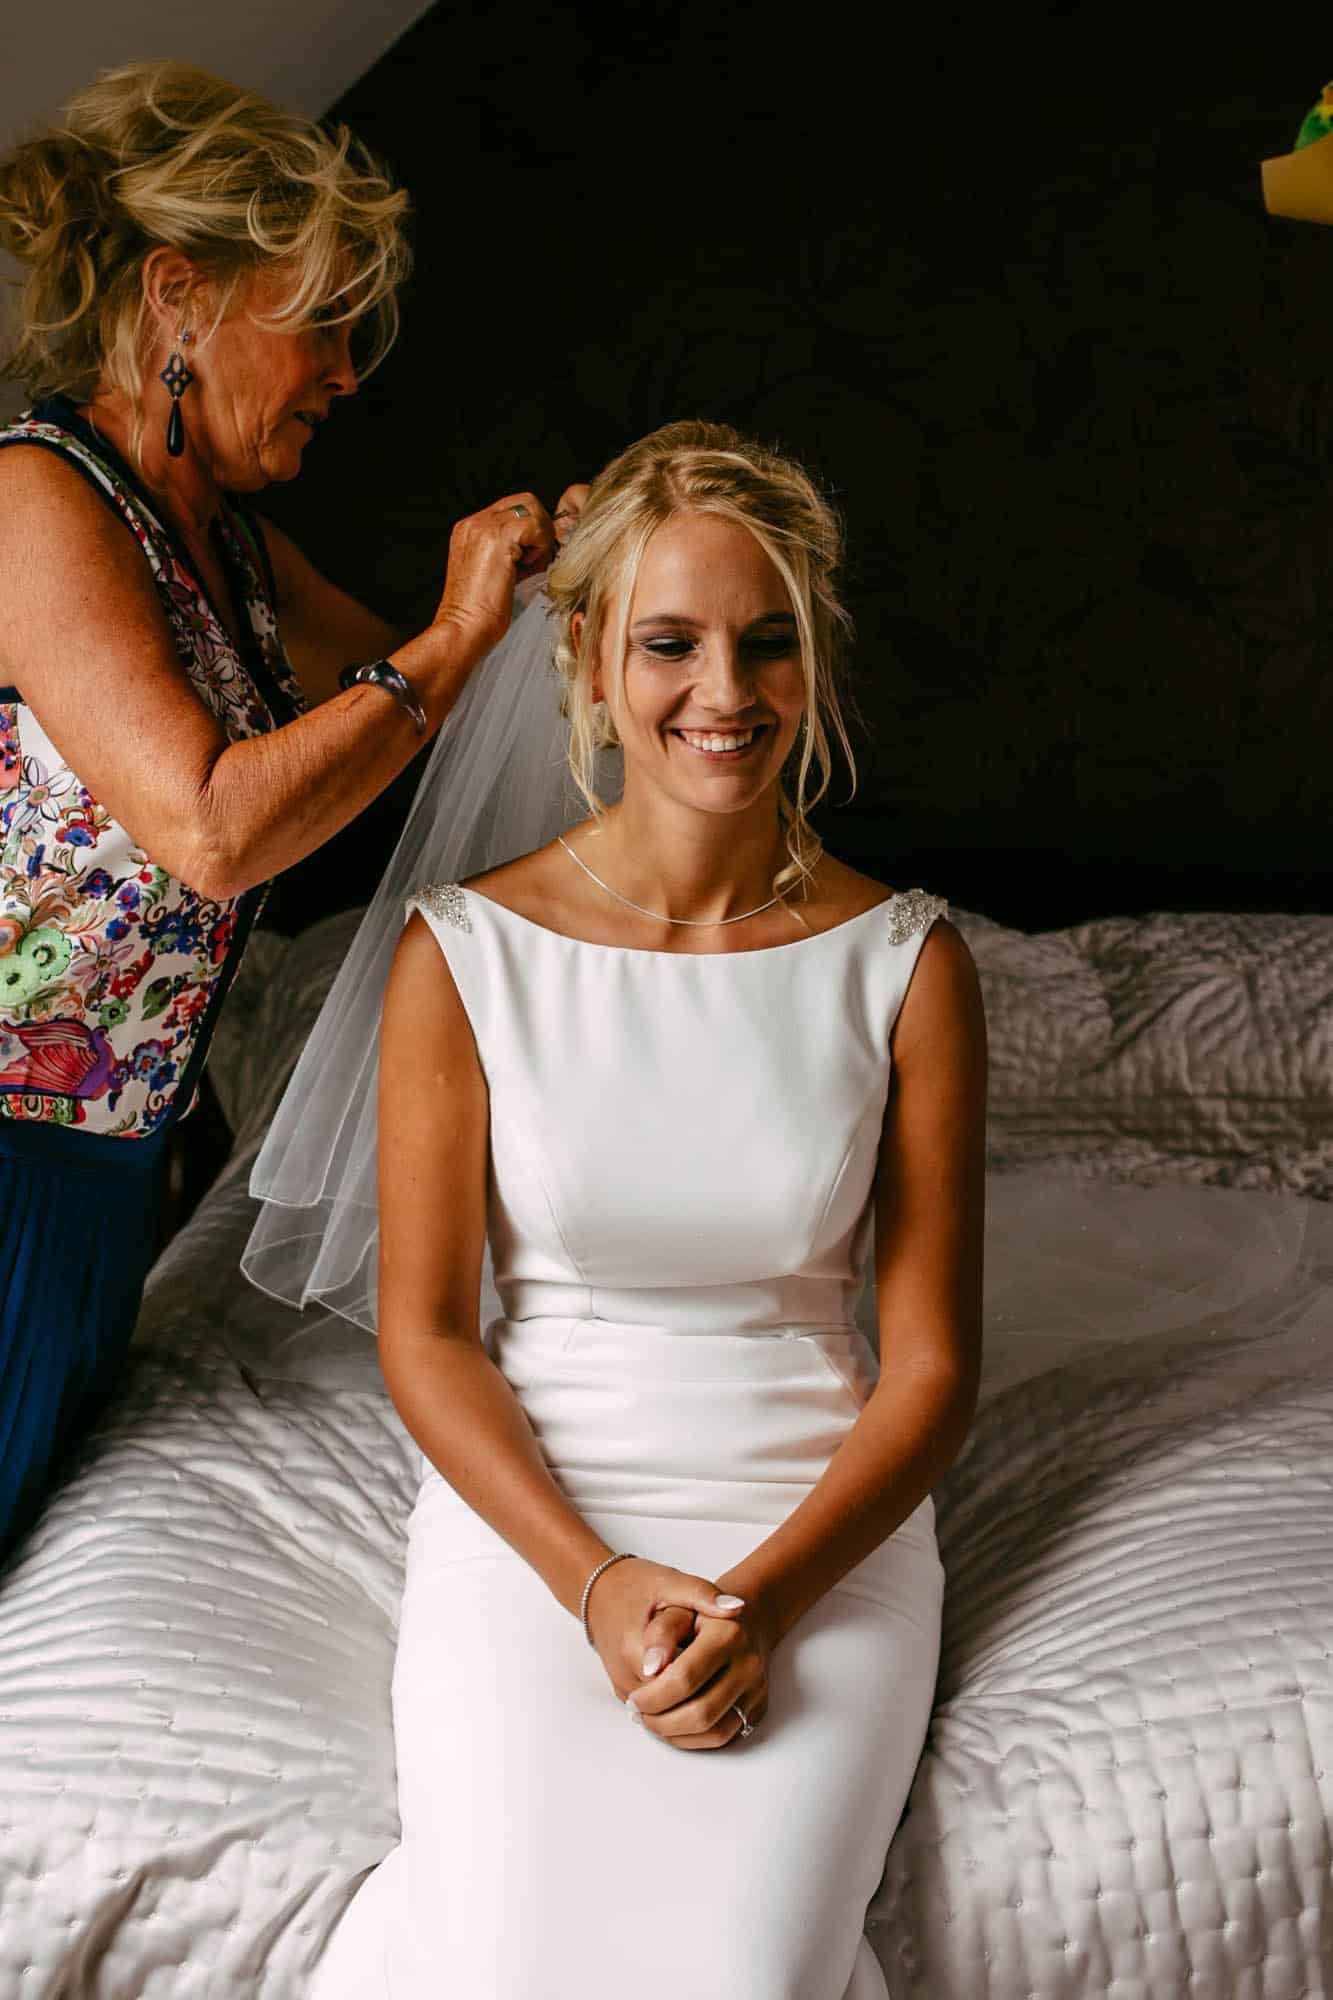 A bride has her hair cut by a woman in a white dress.